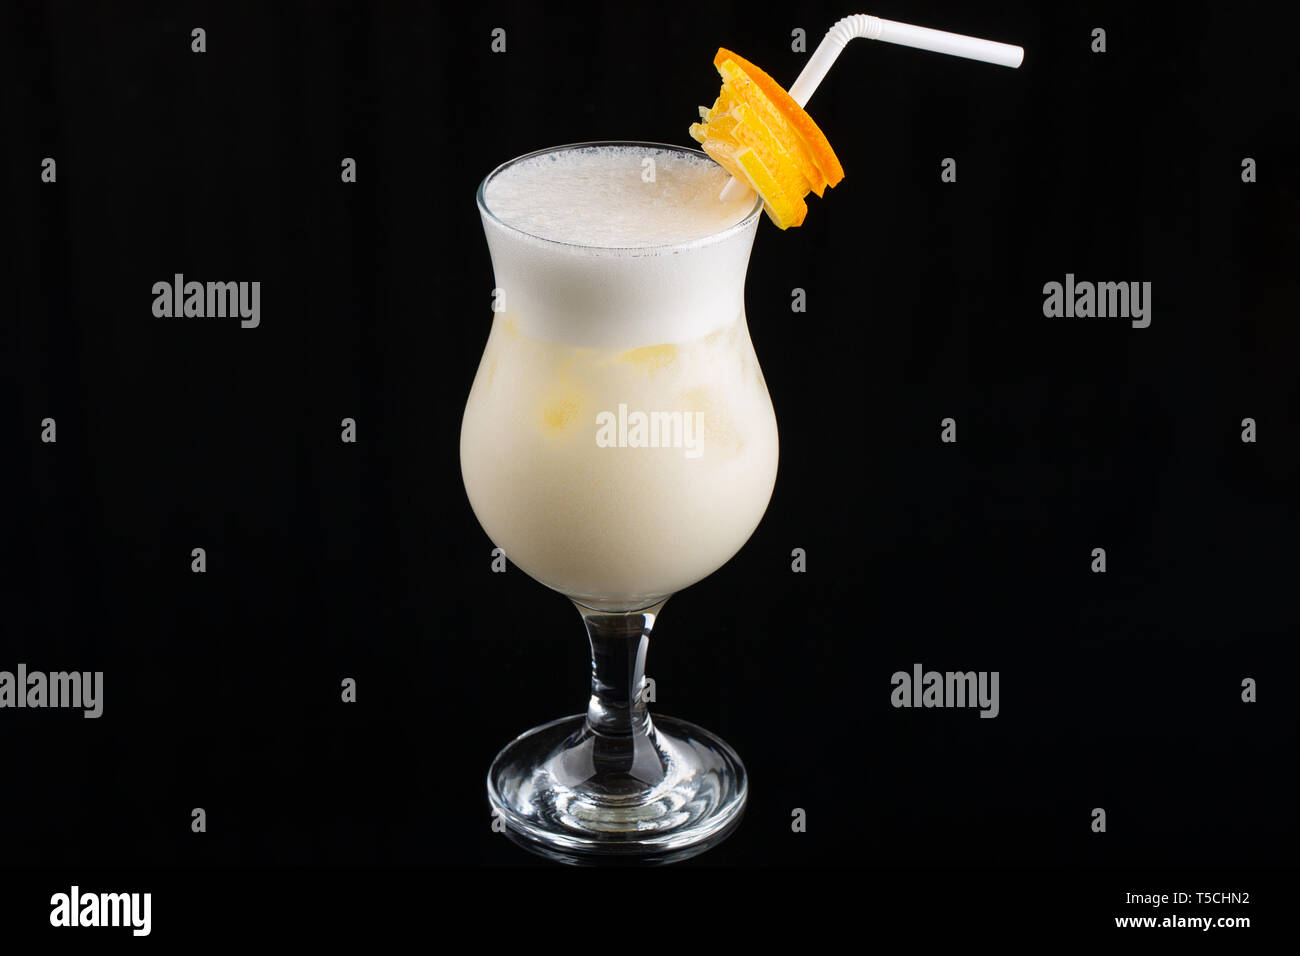 Pina Colada Cocktail - sweet cocktail made with rum, coconut cream or coconut milk garnished with pineapple wedge on black background, selective focus Stock Photo